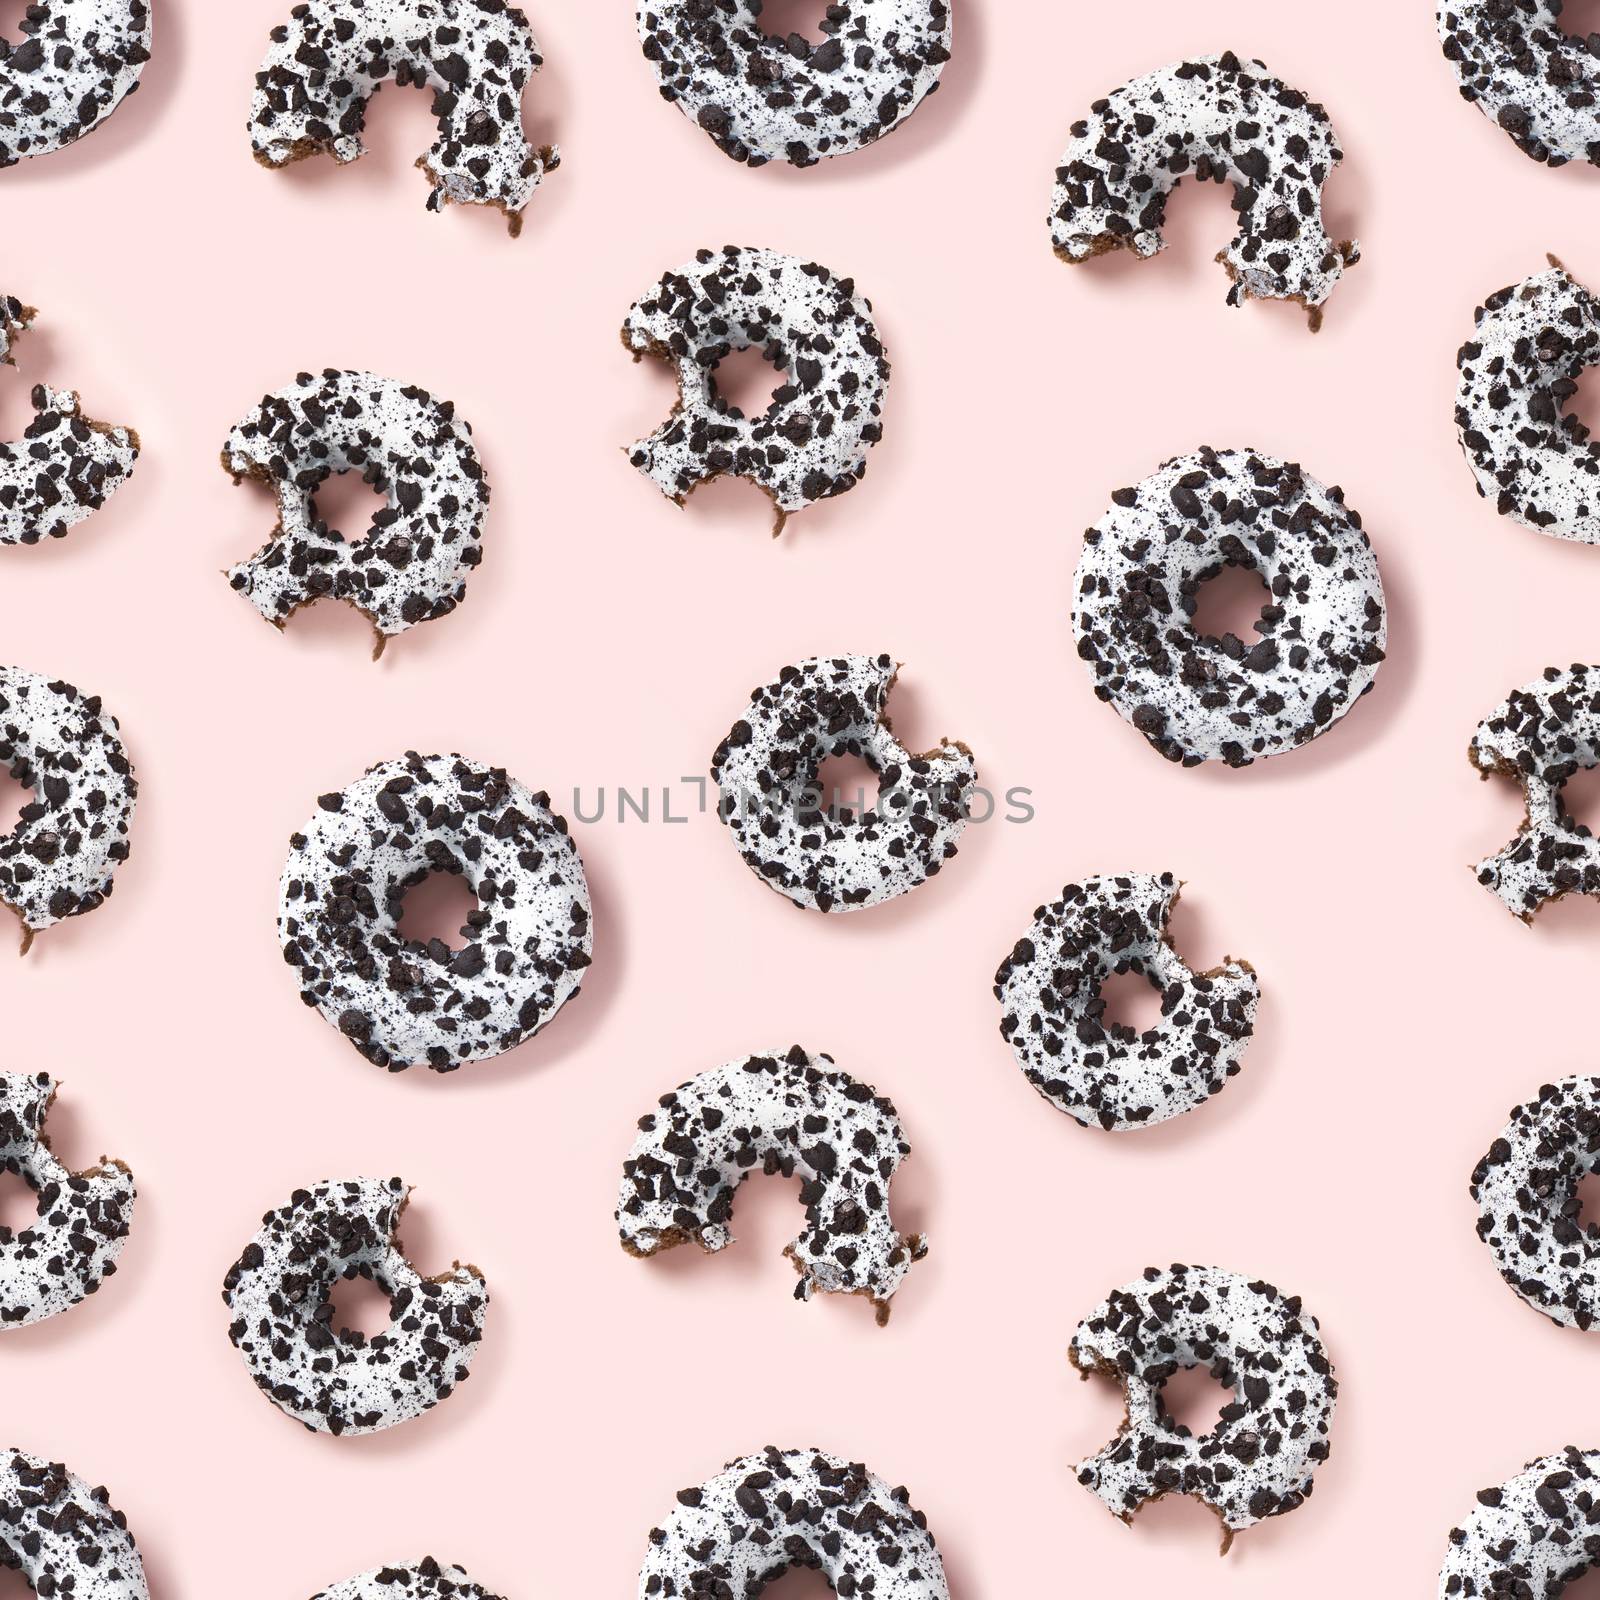 quality seamless pattern of donuts on a pink background top view. Flat lay of delicious nibbled chocolate donuts. used as donut banner, print pattern or poster background